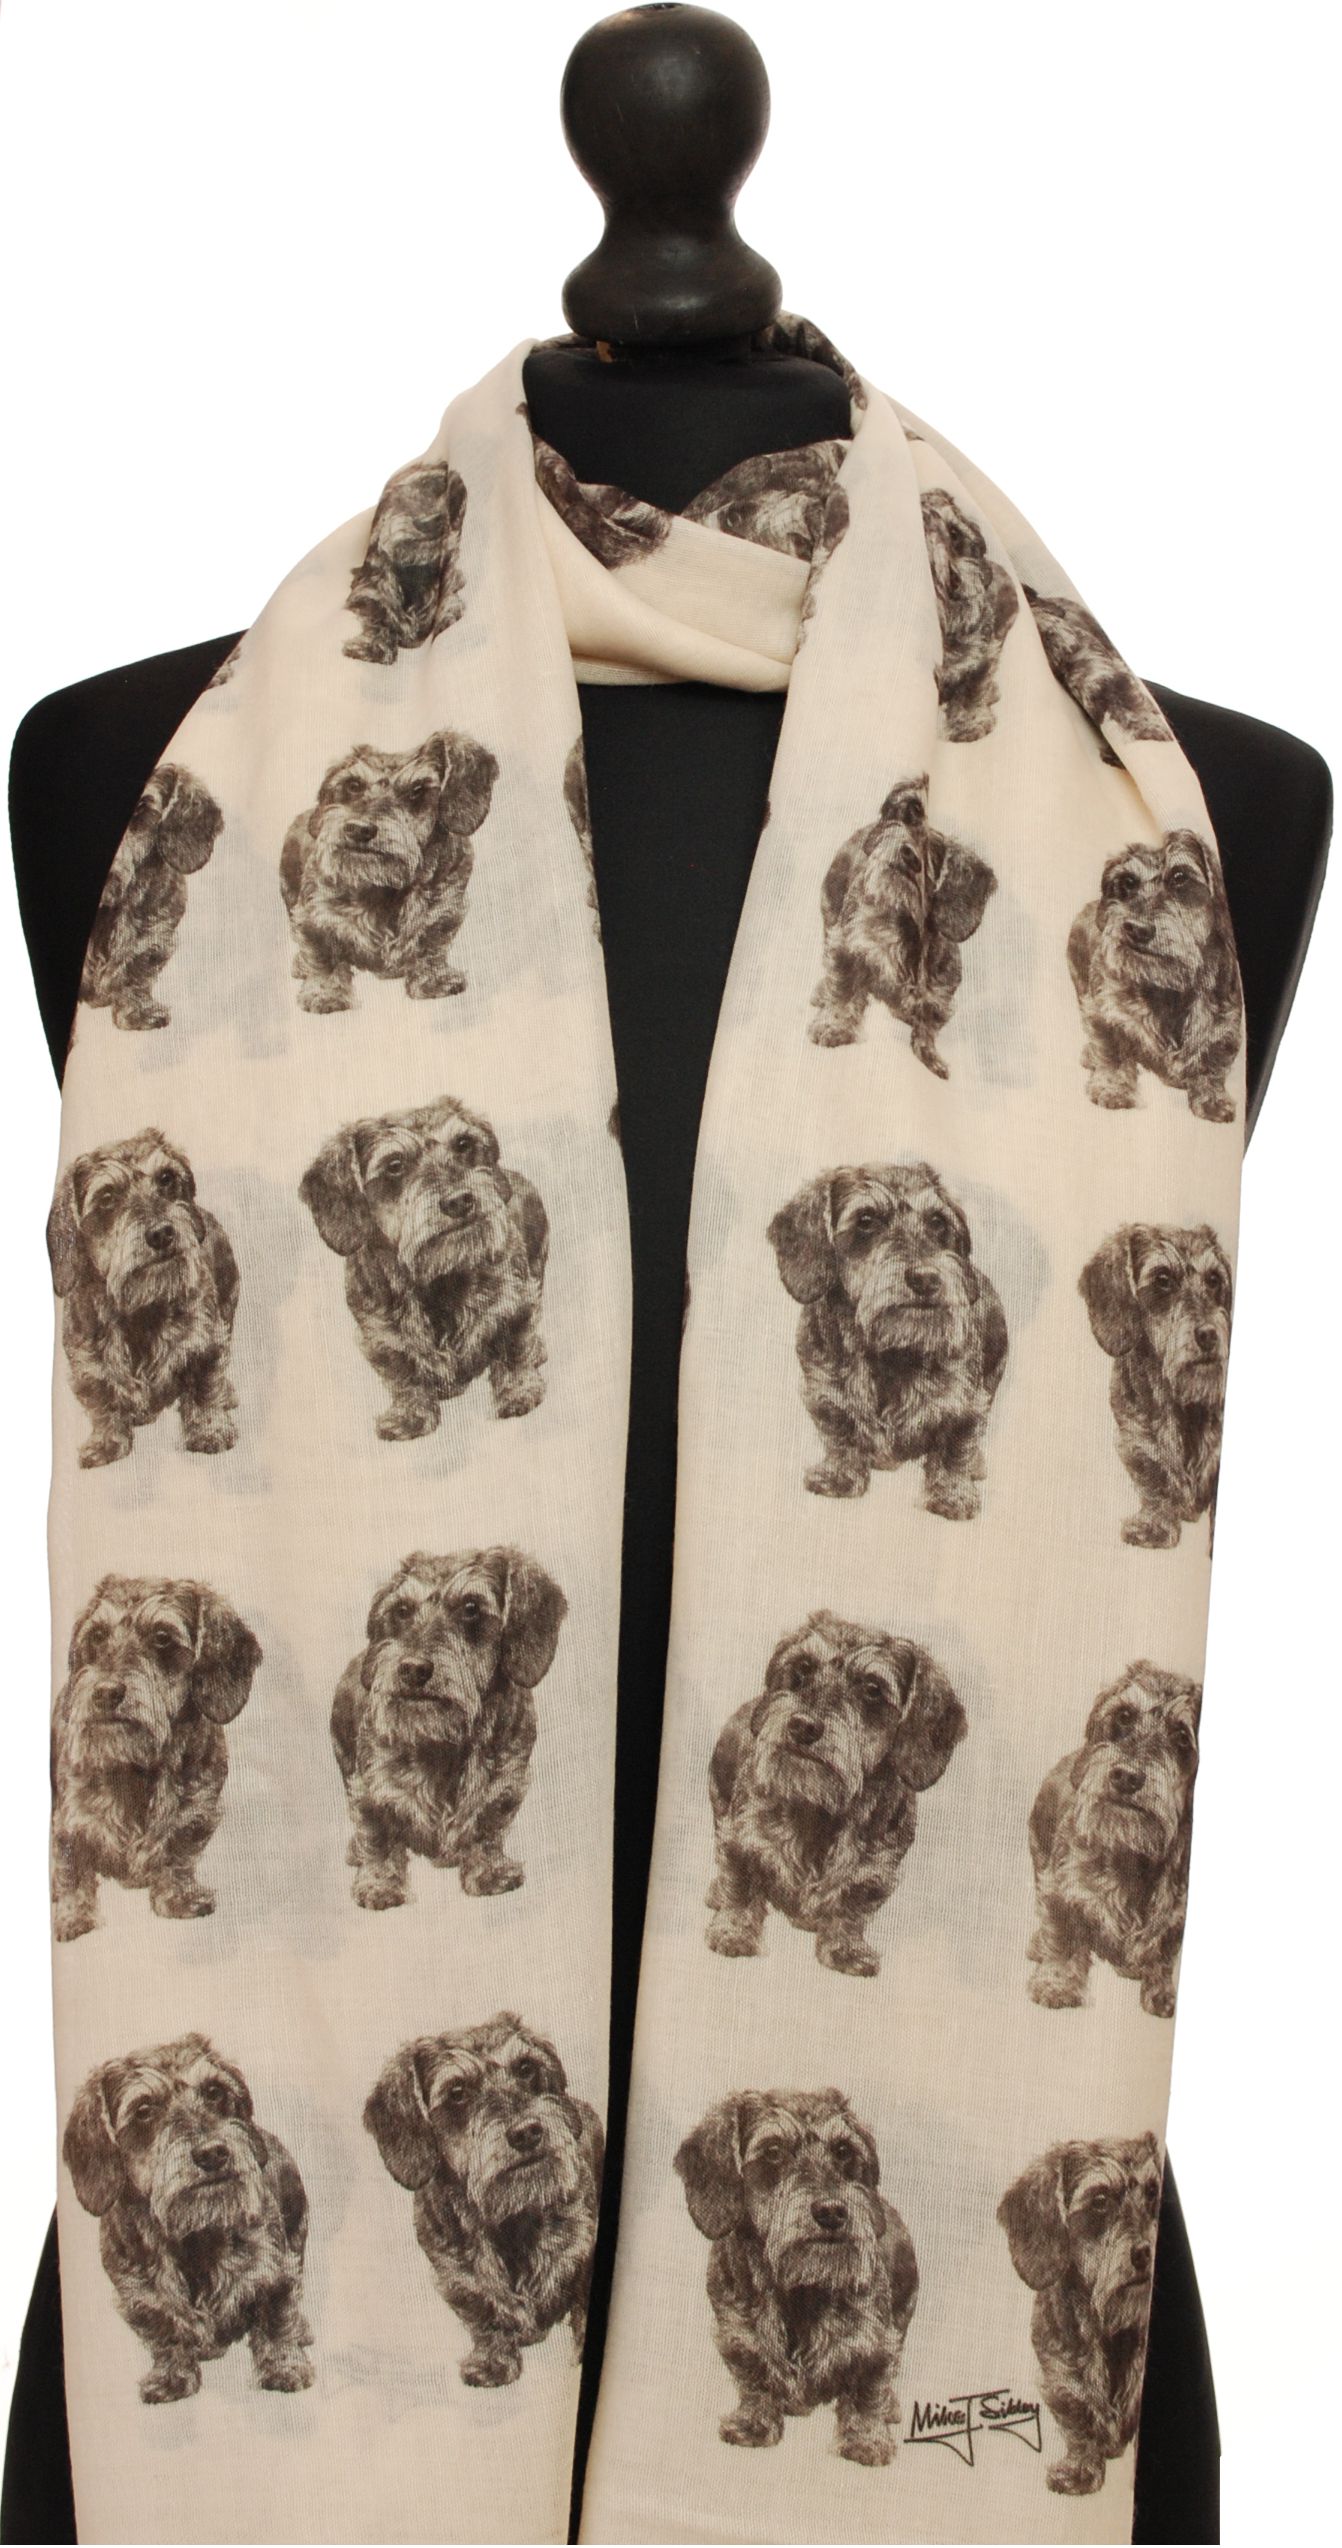 Mike Sibley Wire Haired Dachshund licensed design ladies fashion scarf